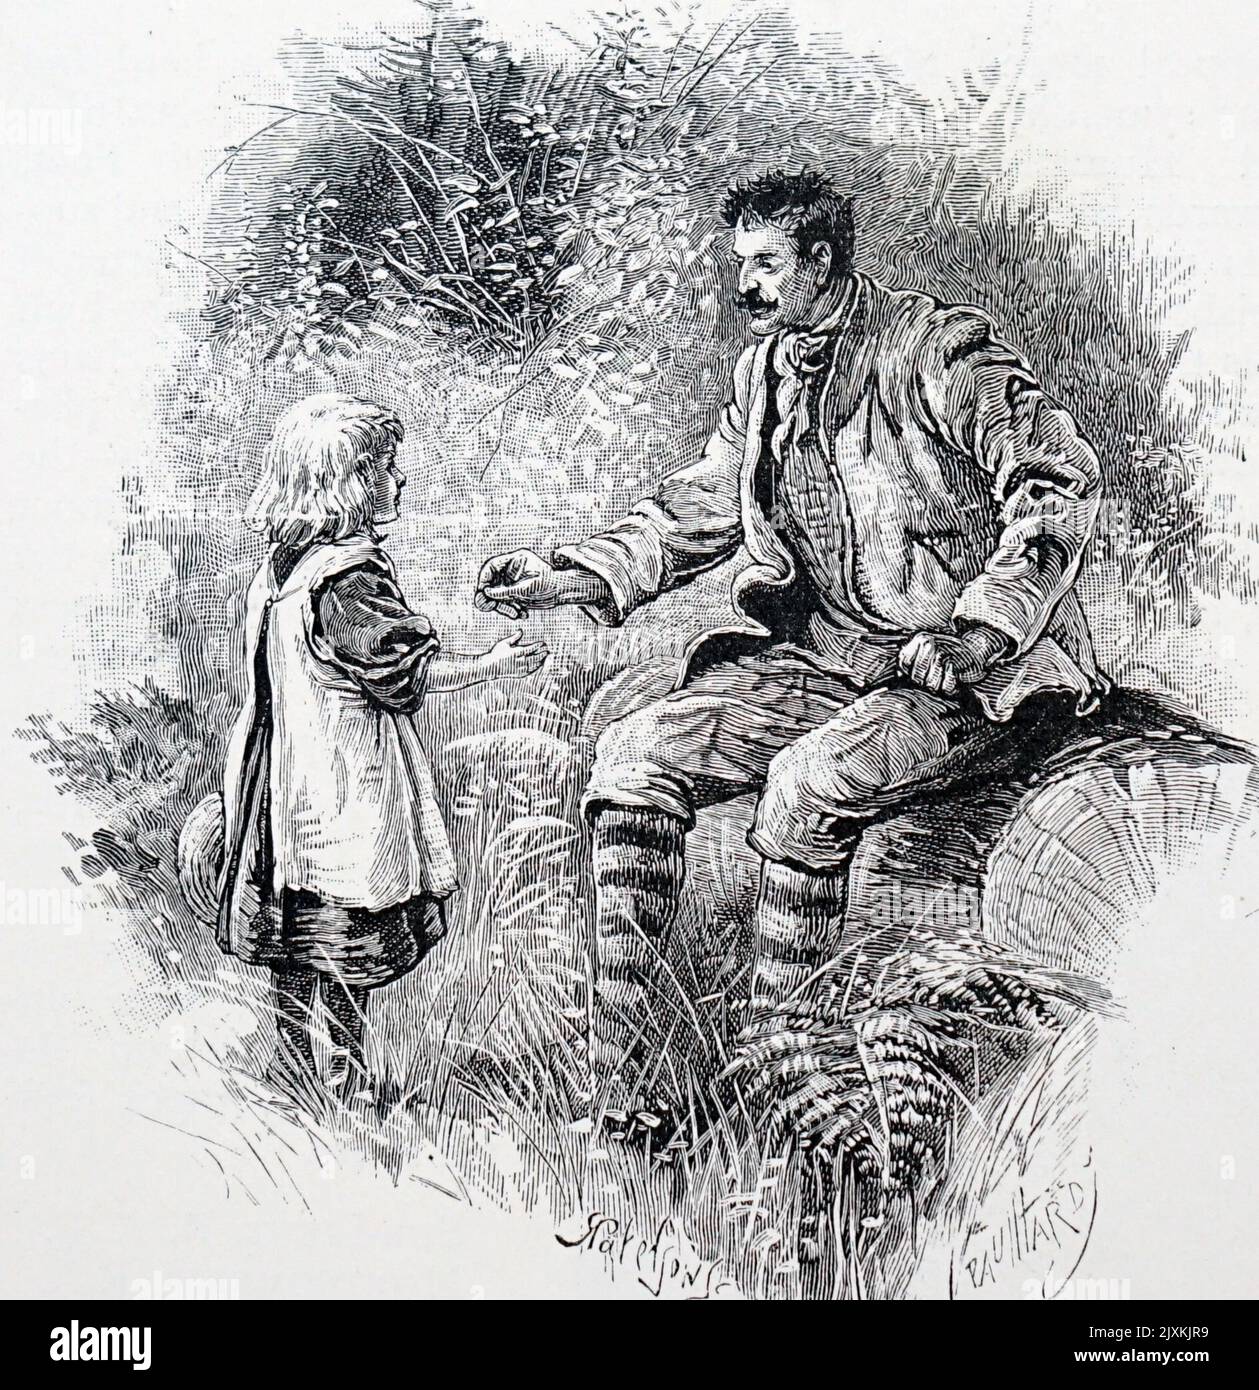 Illustration depicting an escaped convict bribing a child to feed him. Dated 19th Century Stock Photo